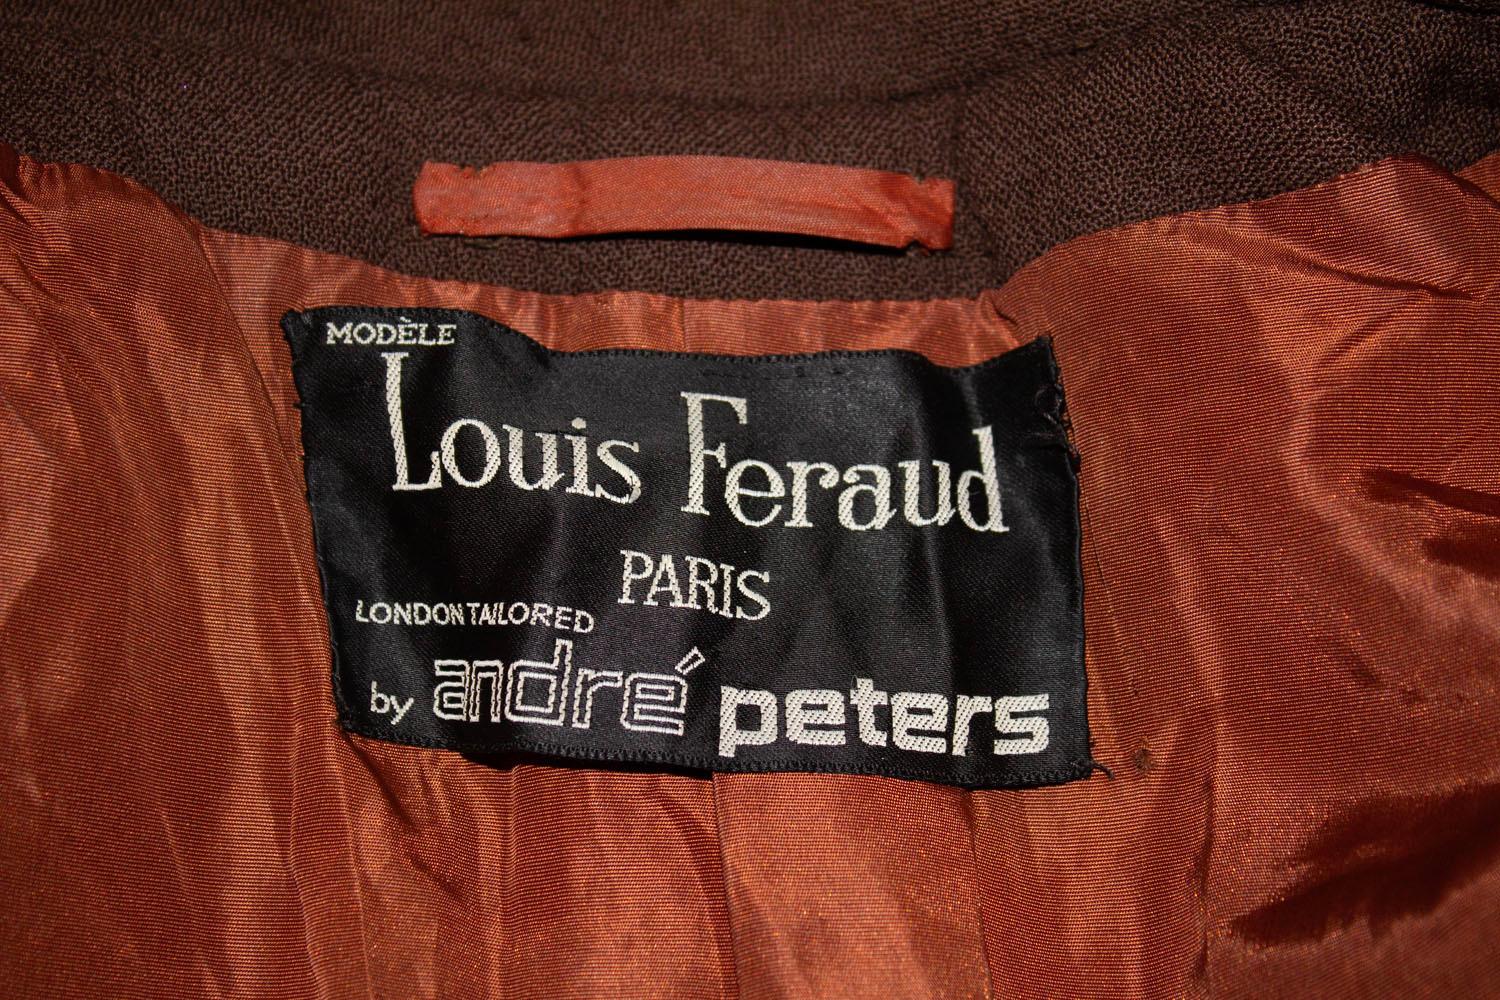 A stylish and practical vibtage coat by Louis Feraud. The coat has wonderful tailoring, and is double breasted with faux pockets and epaulettes. It is fully lined with a 20 ' vent  at the back. Measurements Bust 36